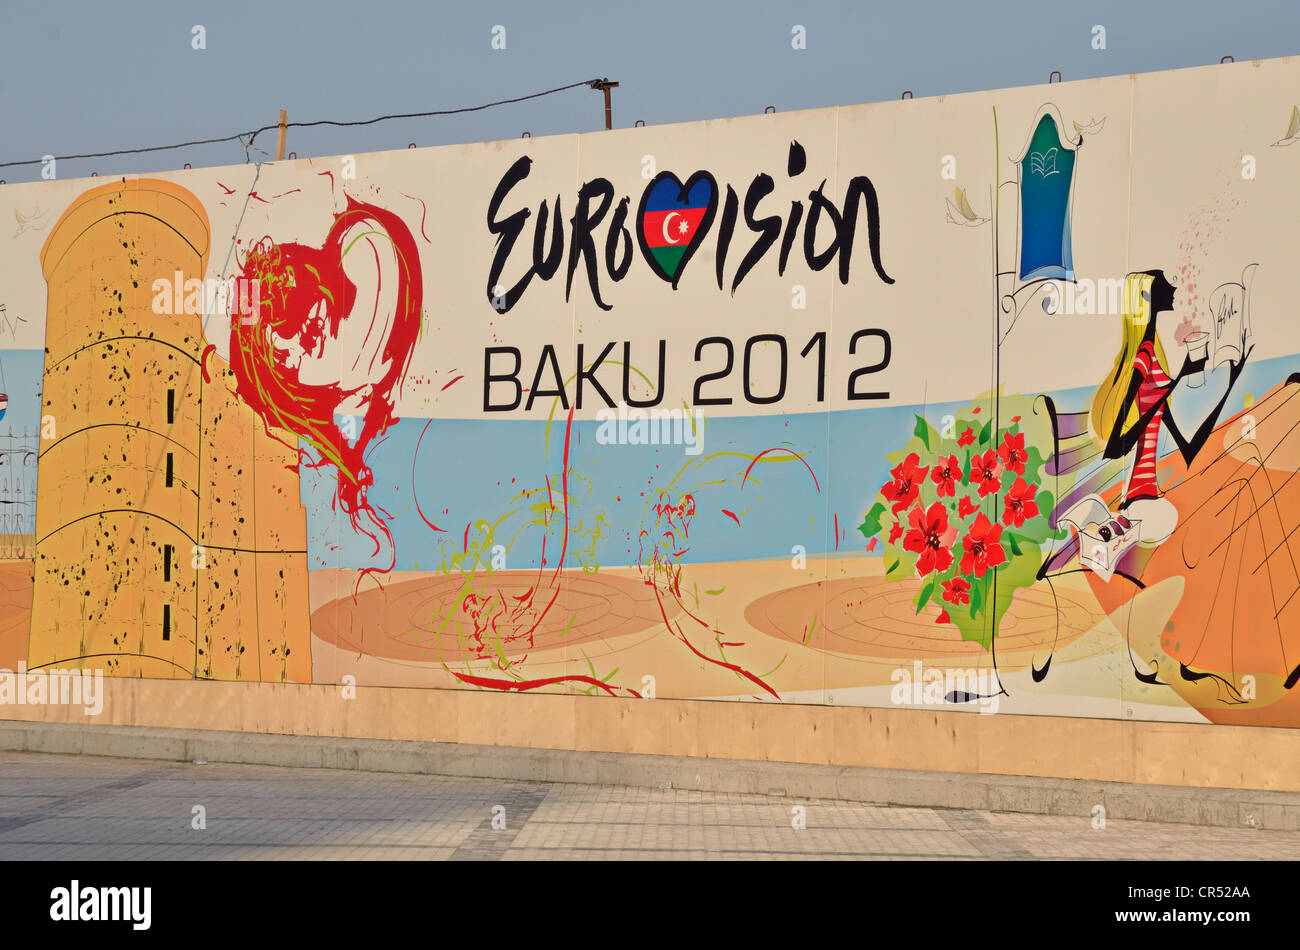 Advertising for the Eurovision Song Contest which is being held for the first time in Azerbaijan, 26th May 2012 Stock Photo